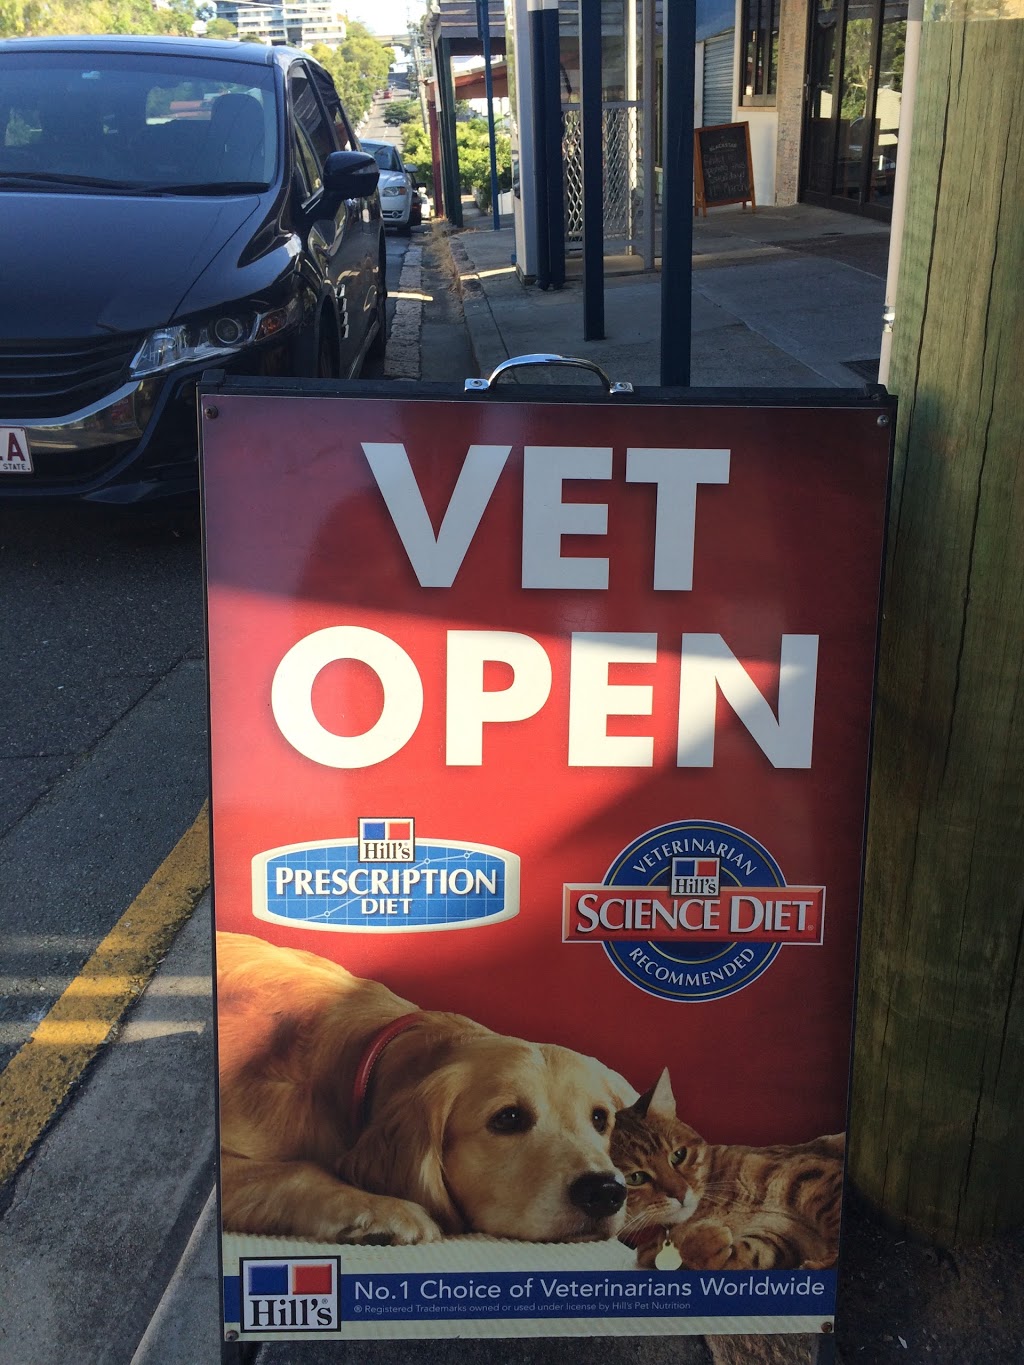 West End Veterinary Surgery | 241 Boundary St, West End QLD 4101, Australia | Phone: (07) 3846 4700